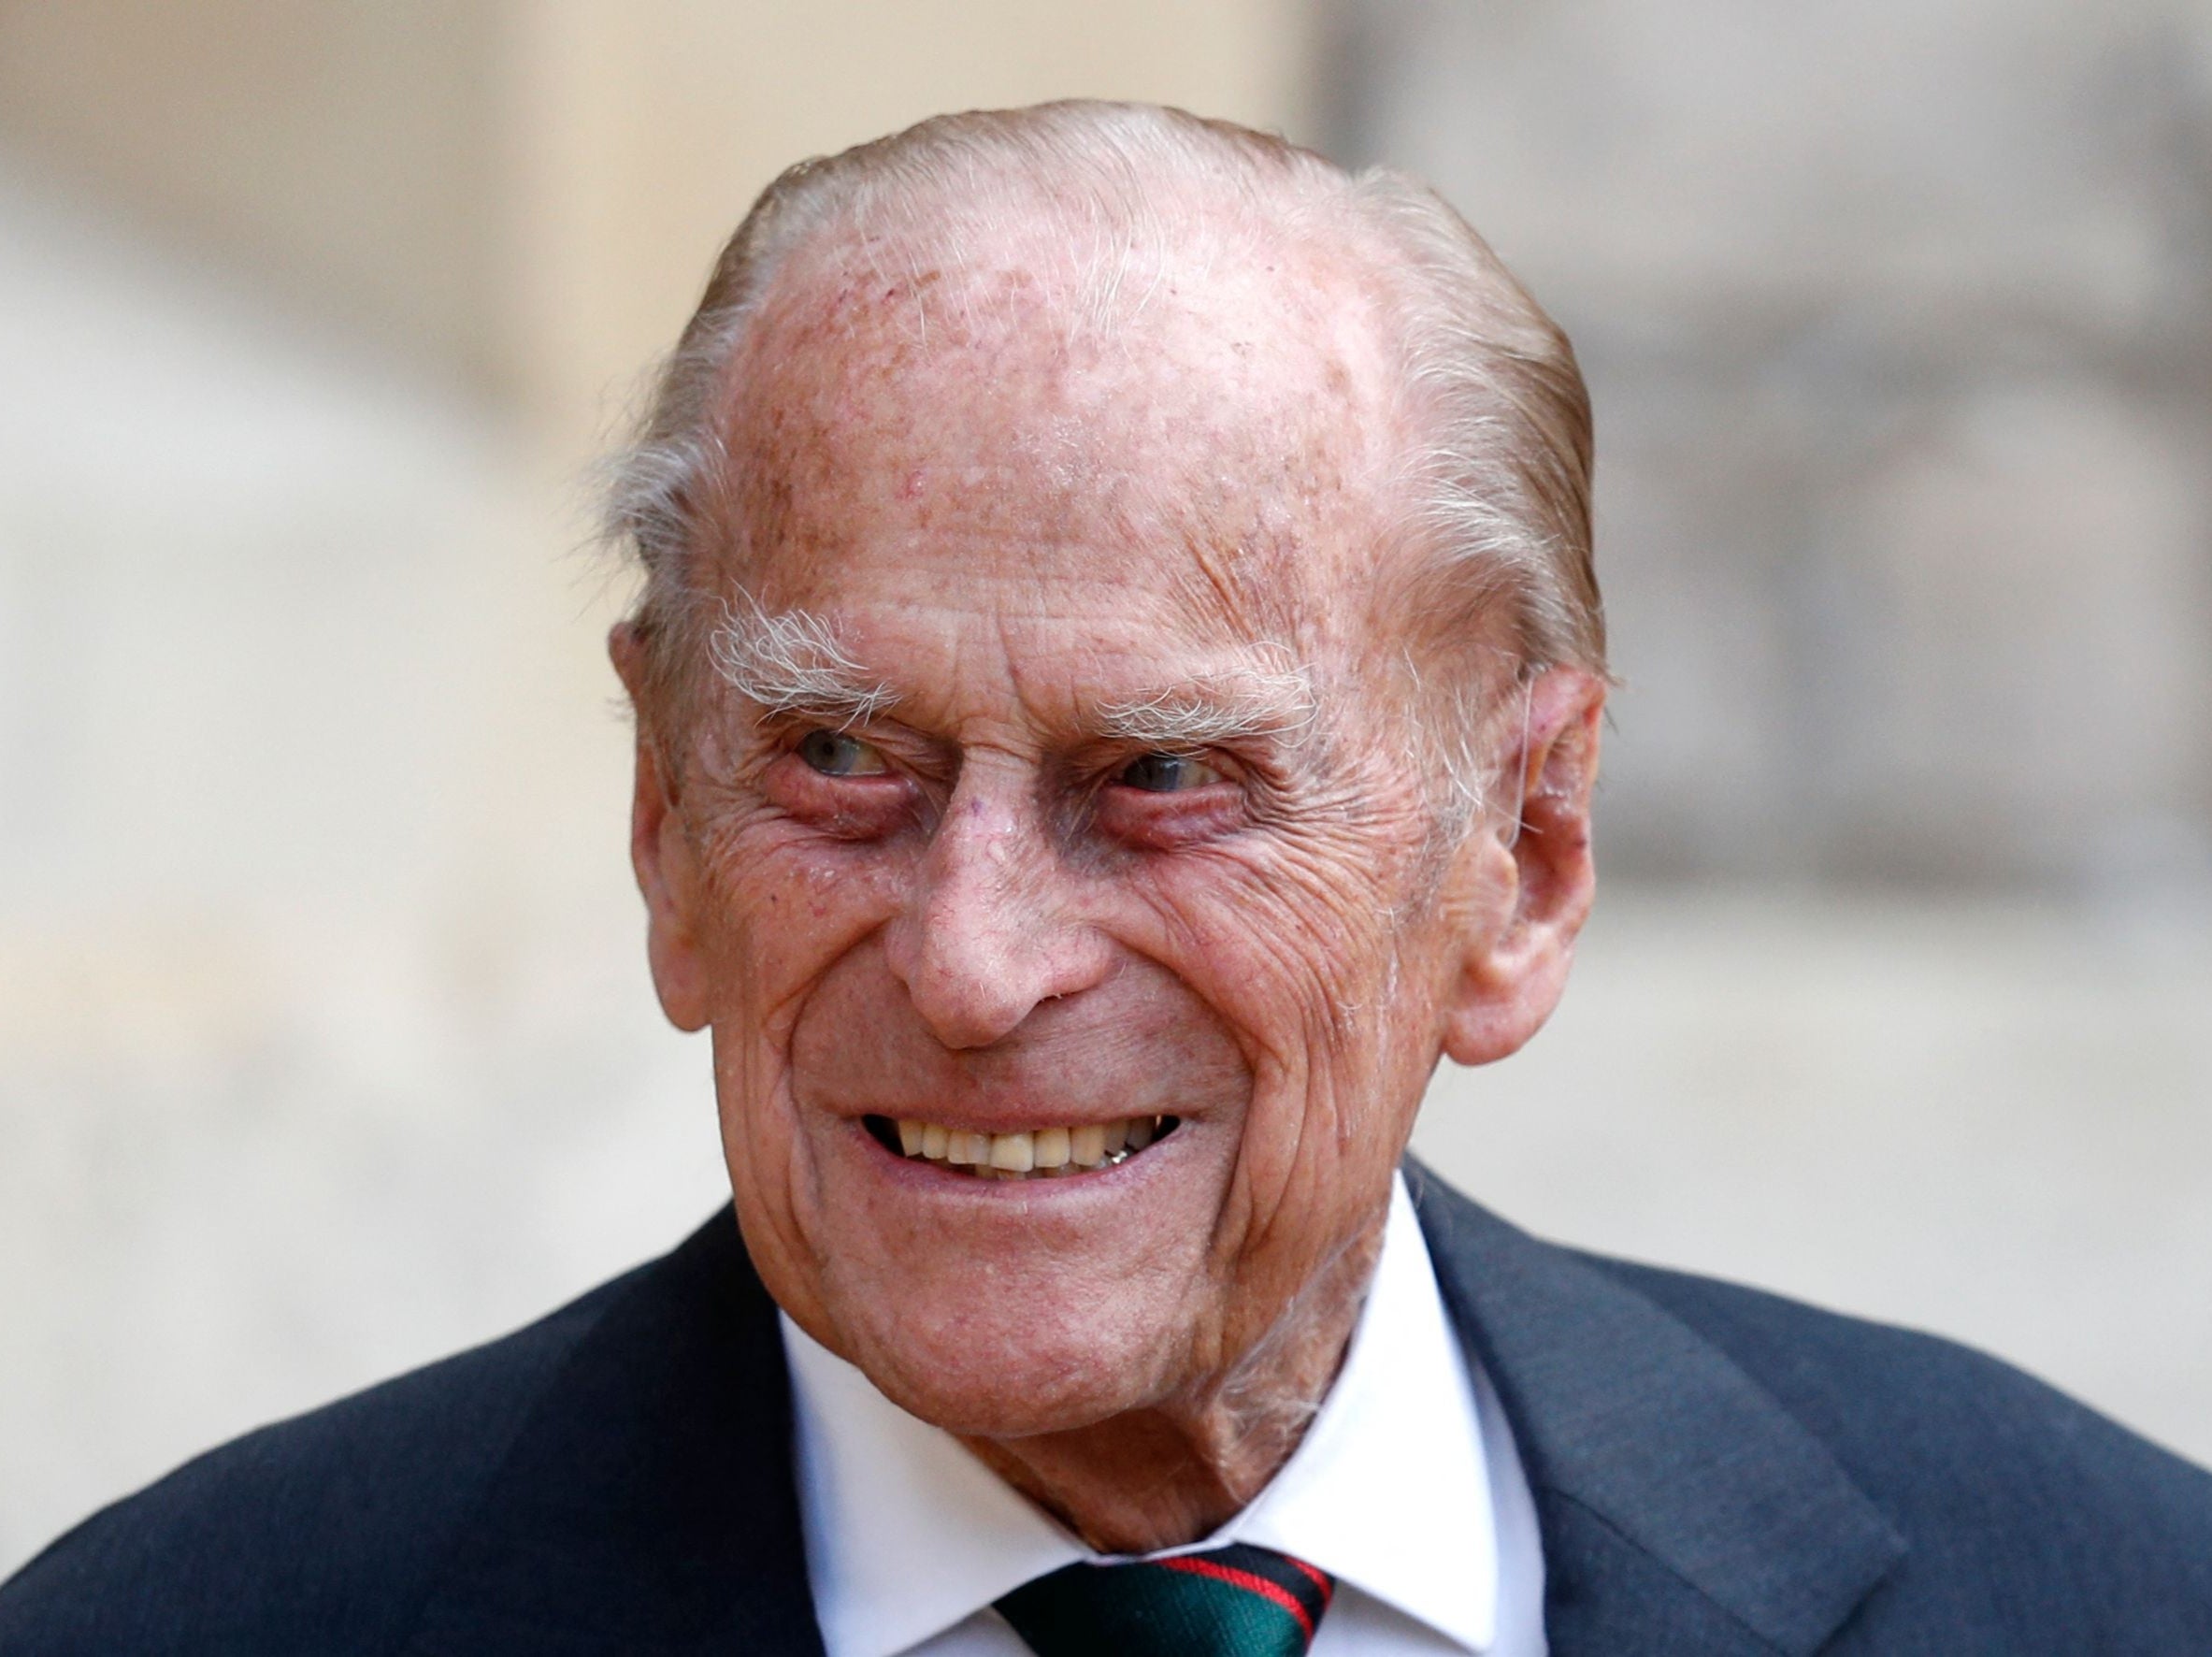 Prince Philip will remain in hospital for several days as he receives treatment for an infection, Buckingham Palace has confirmed